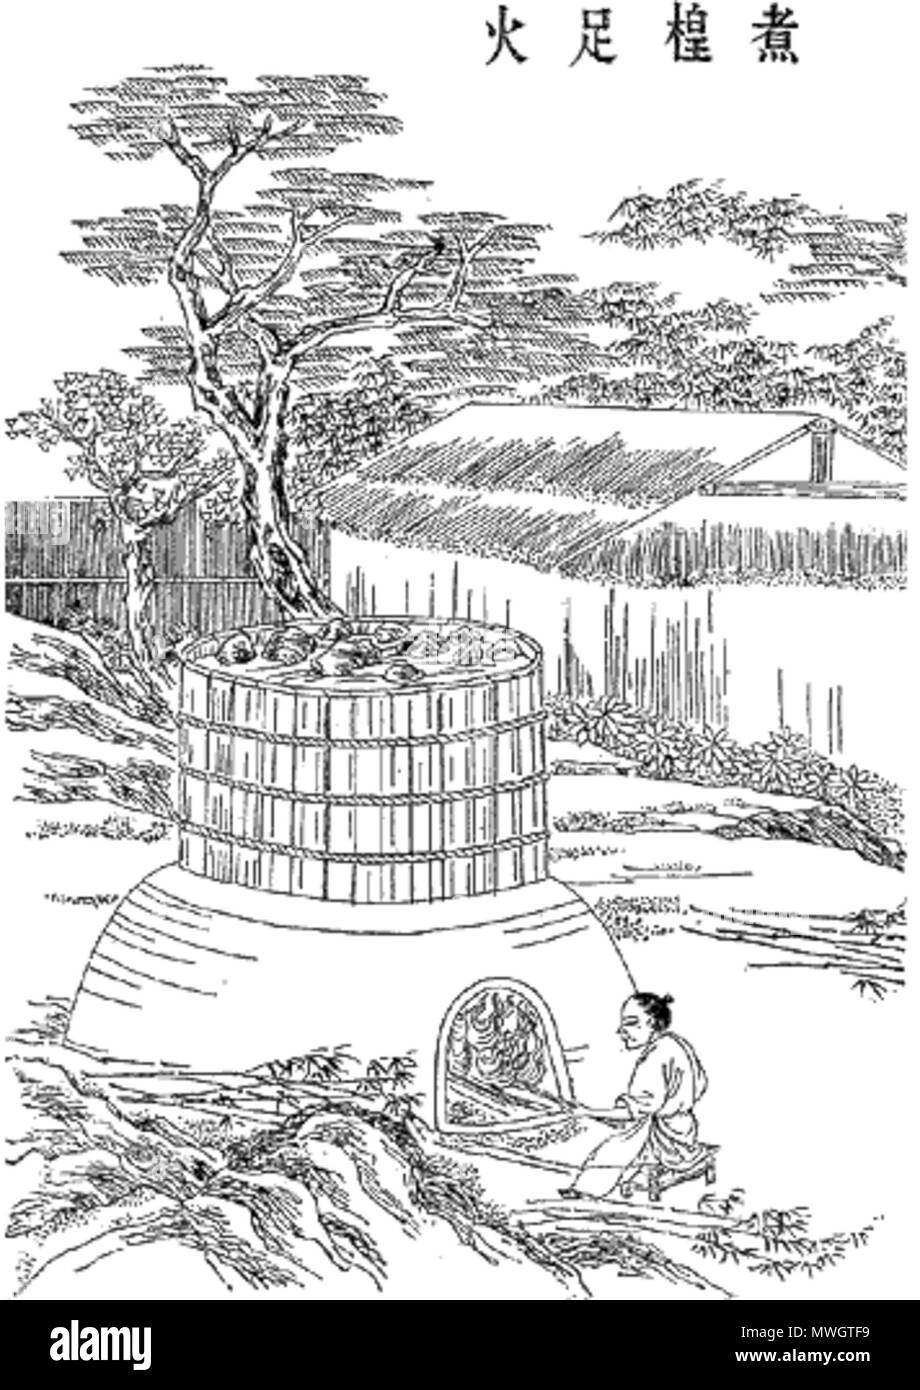 . An image of a Ming dynasty woodcut describing five major steps in ancient Chinese papermaking process as outlined by Cai Lun in 105 AD . This file is lacking author information. 389 Making Paper 2 Stock Photo